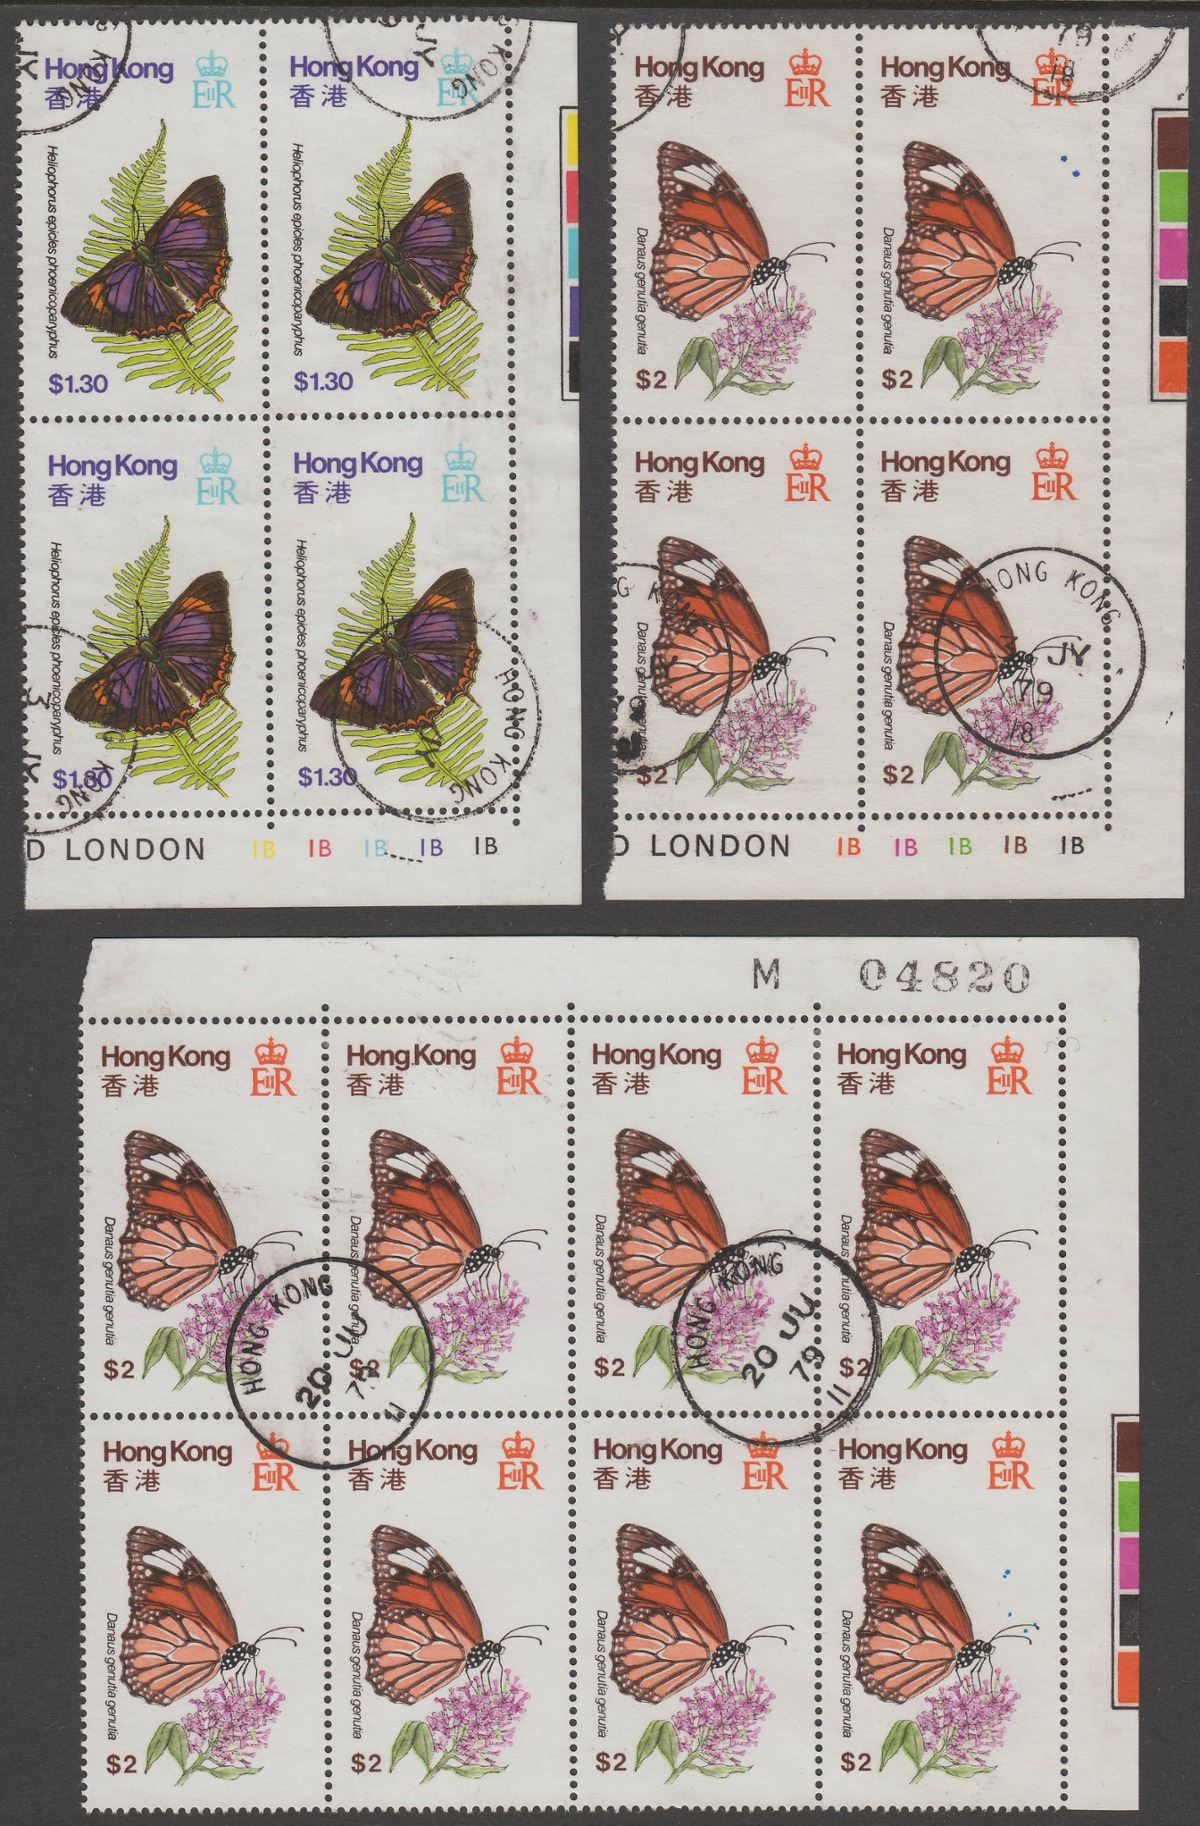 Hong Kong 1979 QEII Butterflies $1.30, $2 Blocks Used Plate Nos + Requisition No